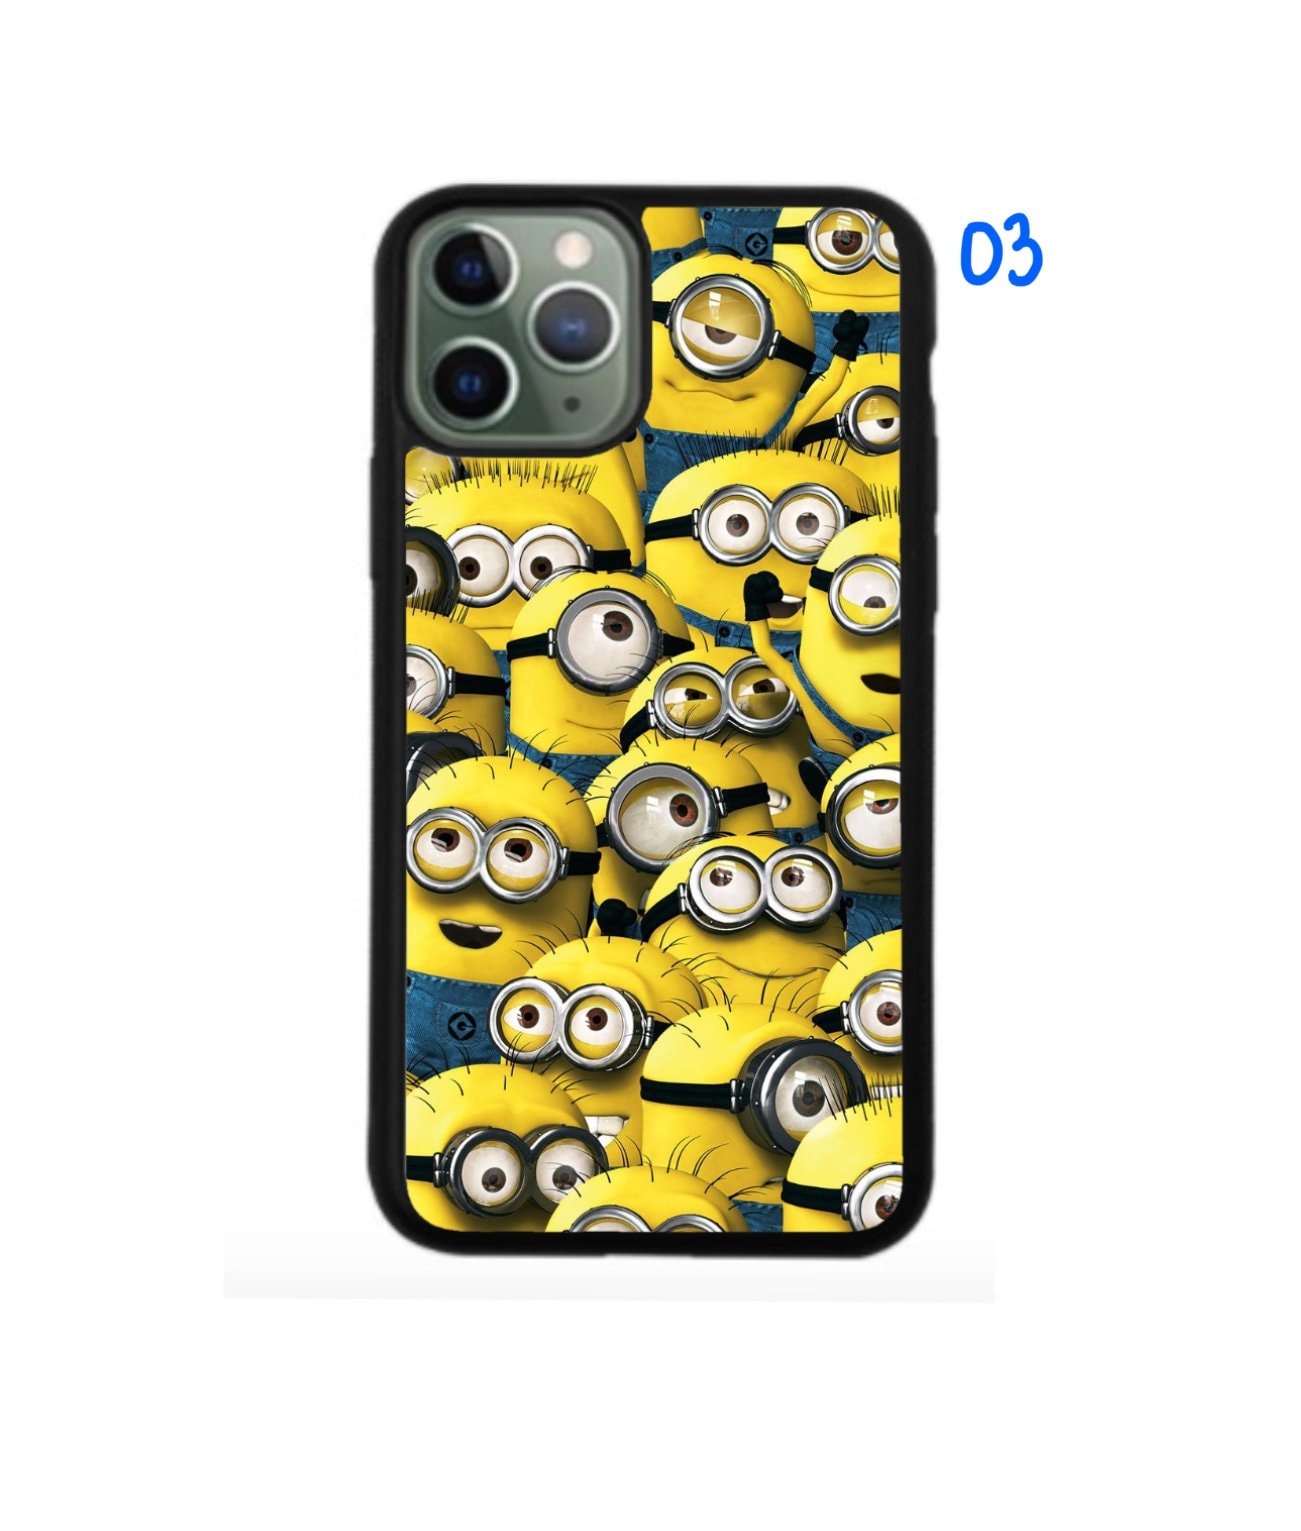 Minion Phone Cases. Despicable Me Phone Cases. iPhone & | Etsy